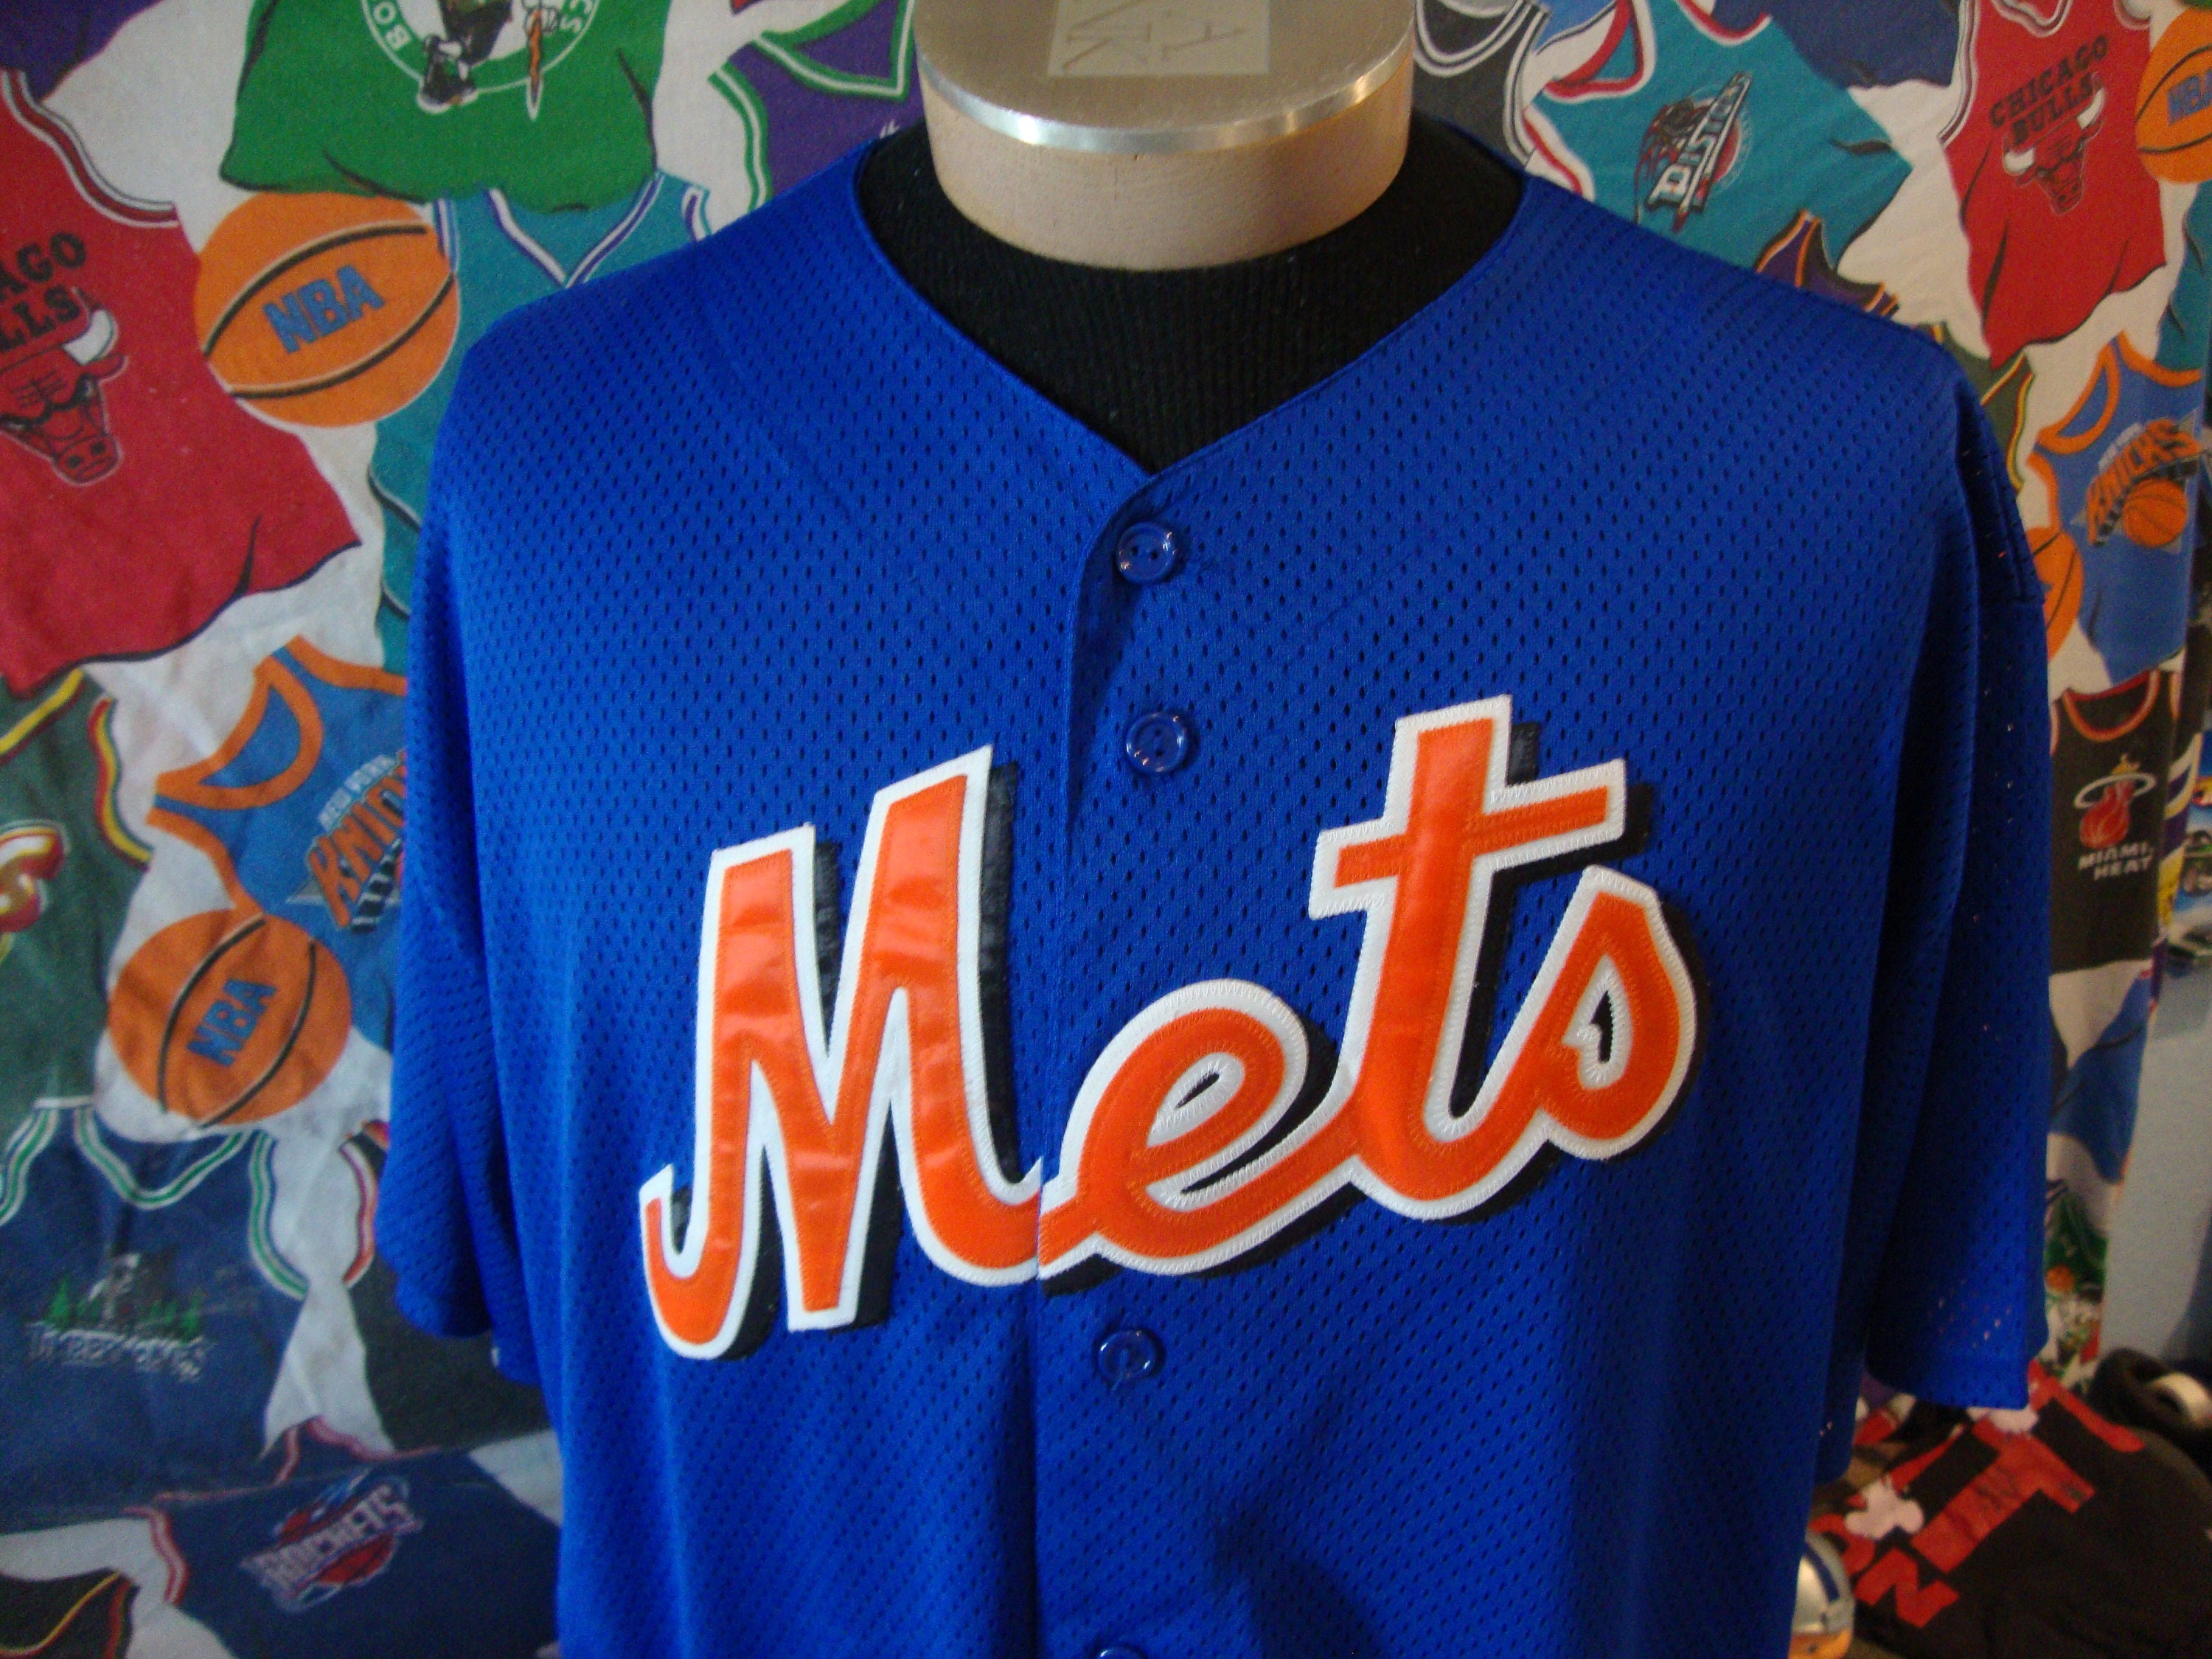 Men's New York Mets #5 David Wright Authentic White Cooperstown Baseball  Jersey